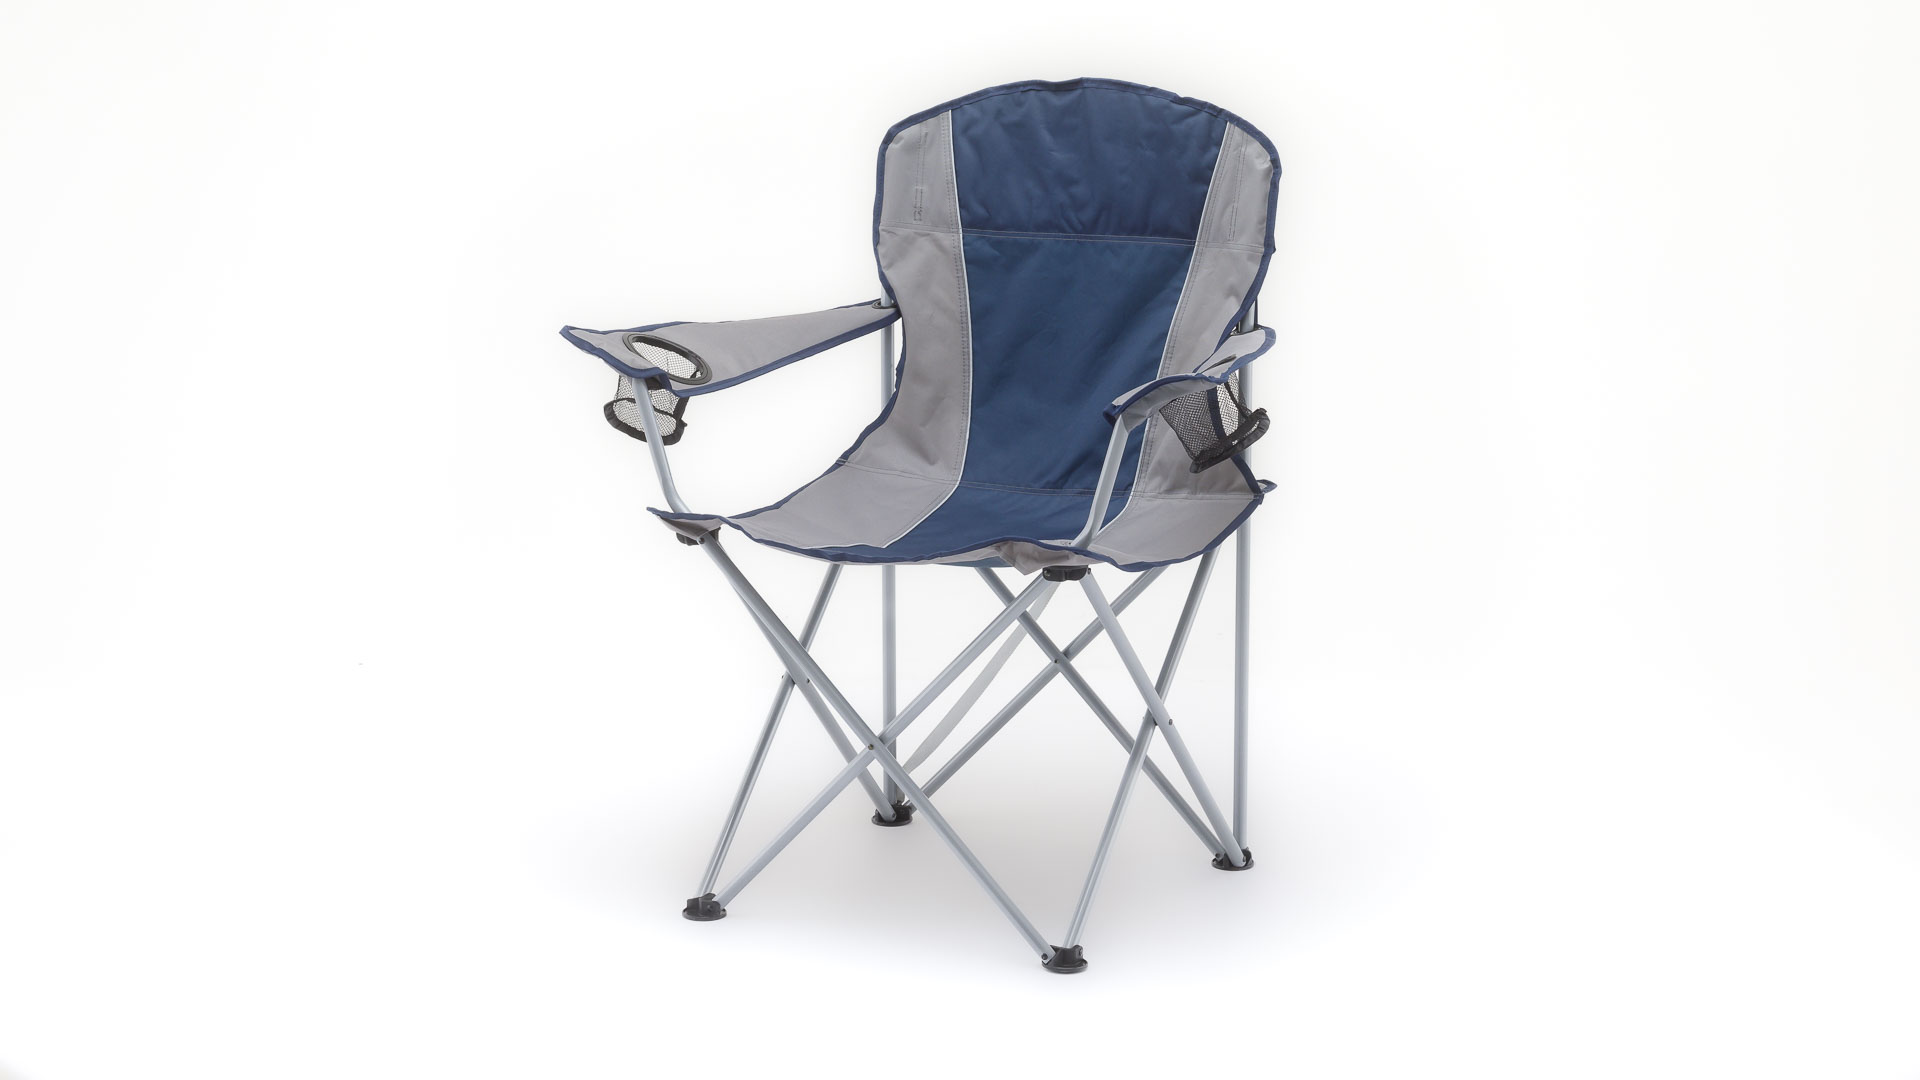 Ozark Trail Oversized Quad Camping Chair, Blue Cove 